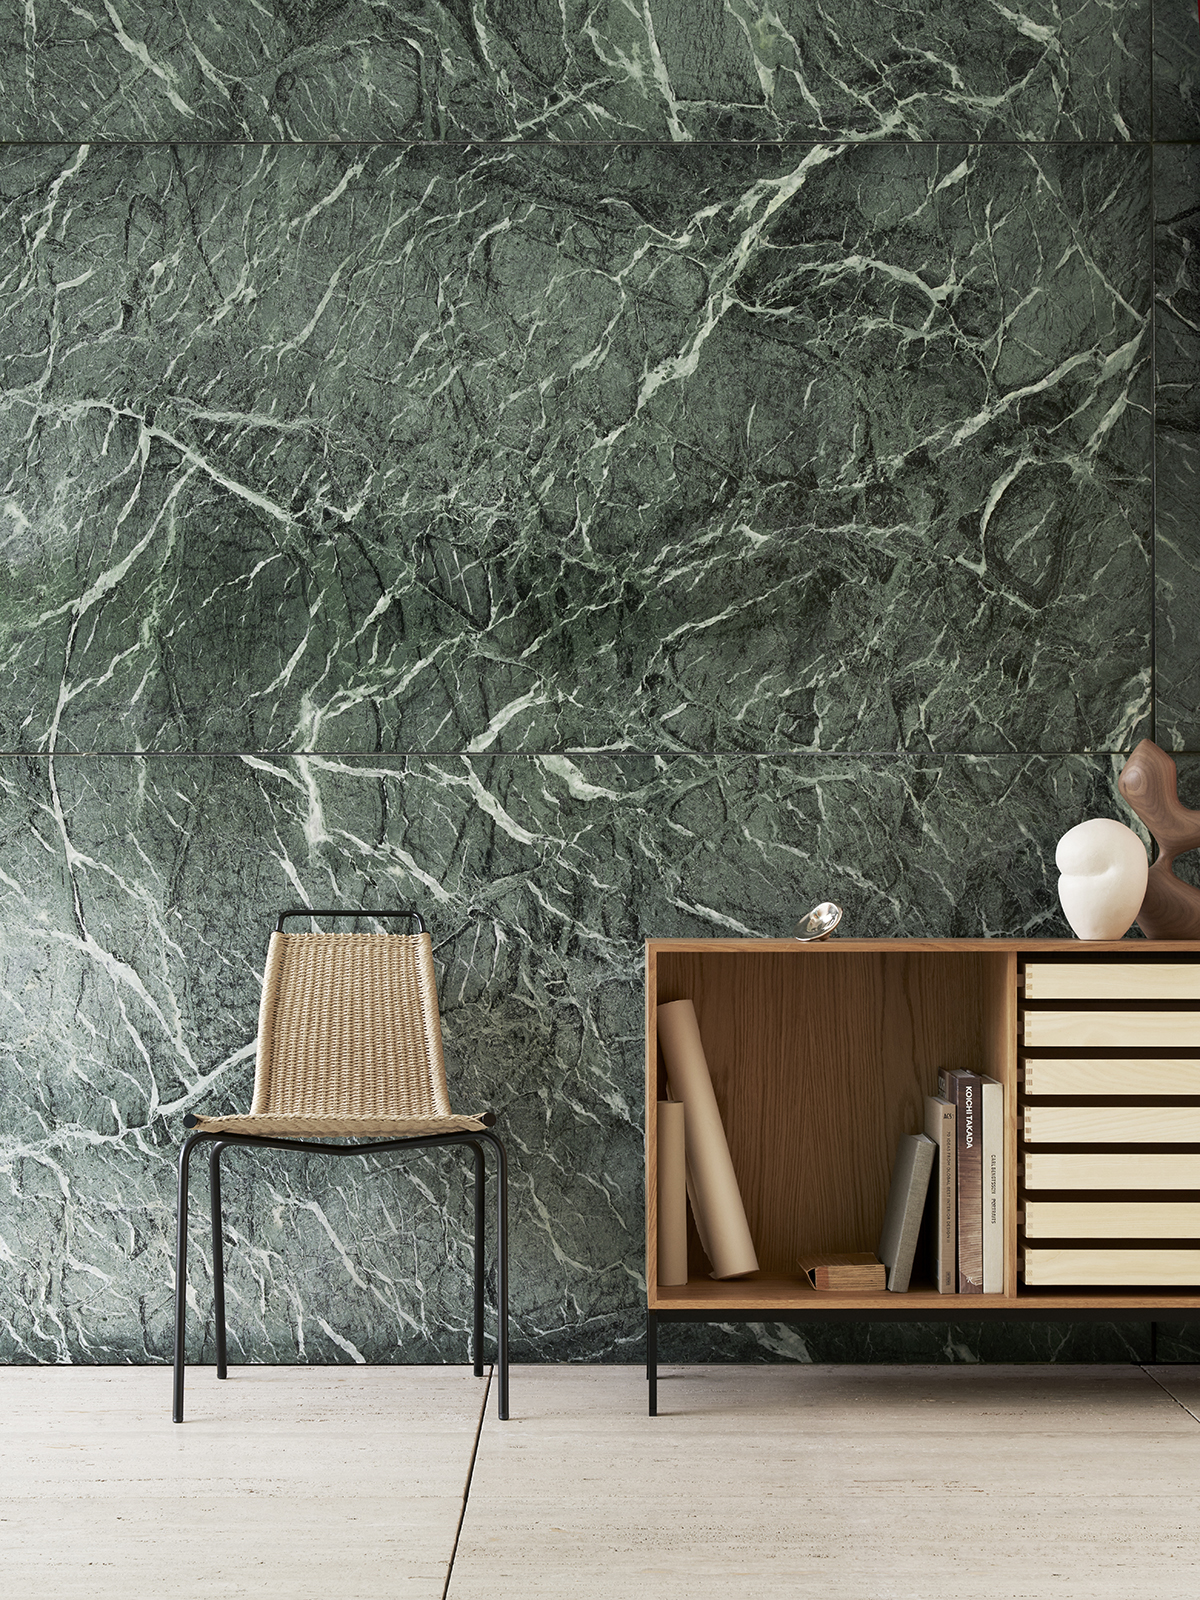 A Carl Hansen chair placed next to a wooden cabinet beside a green marble wall